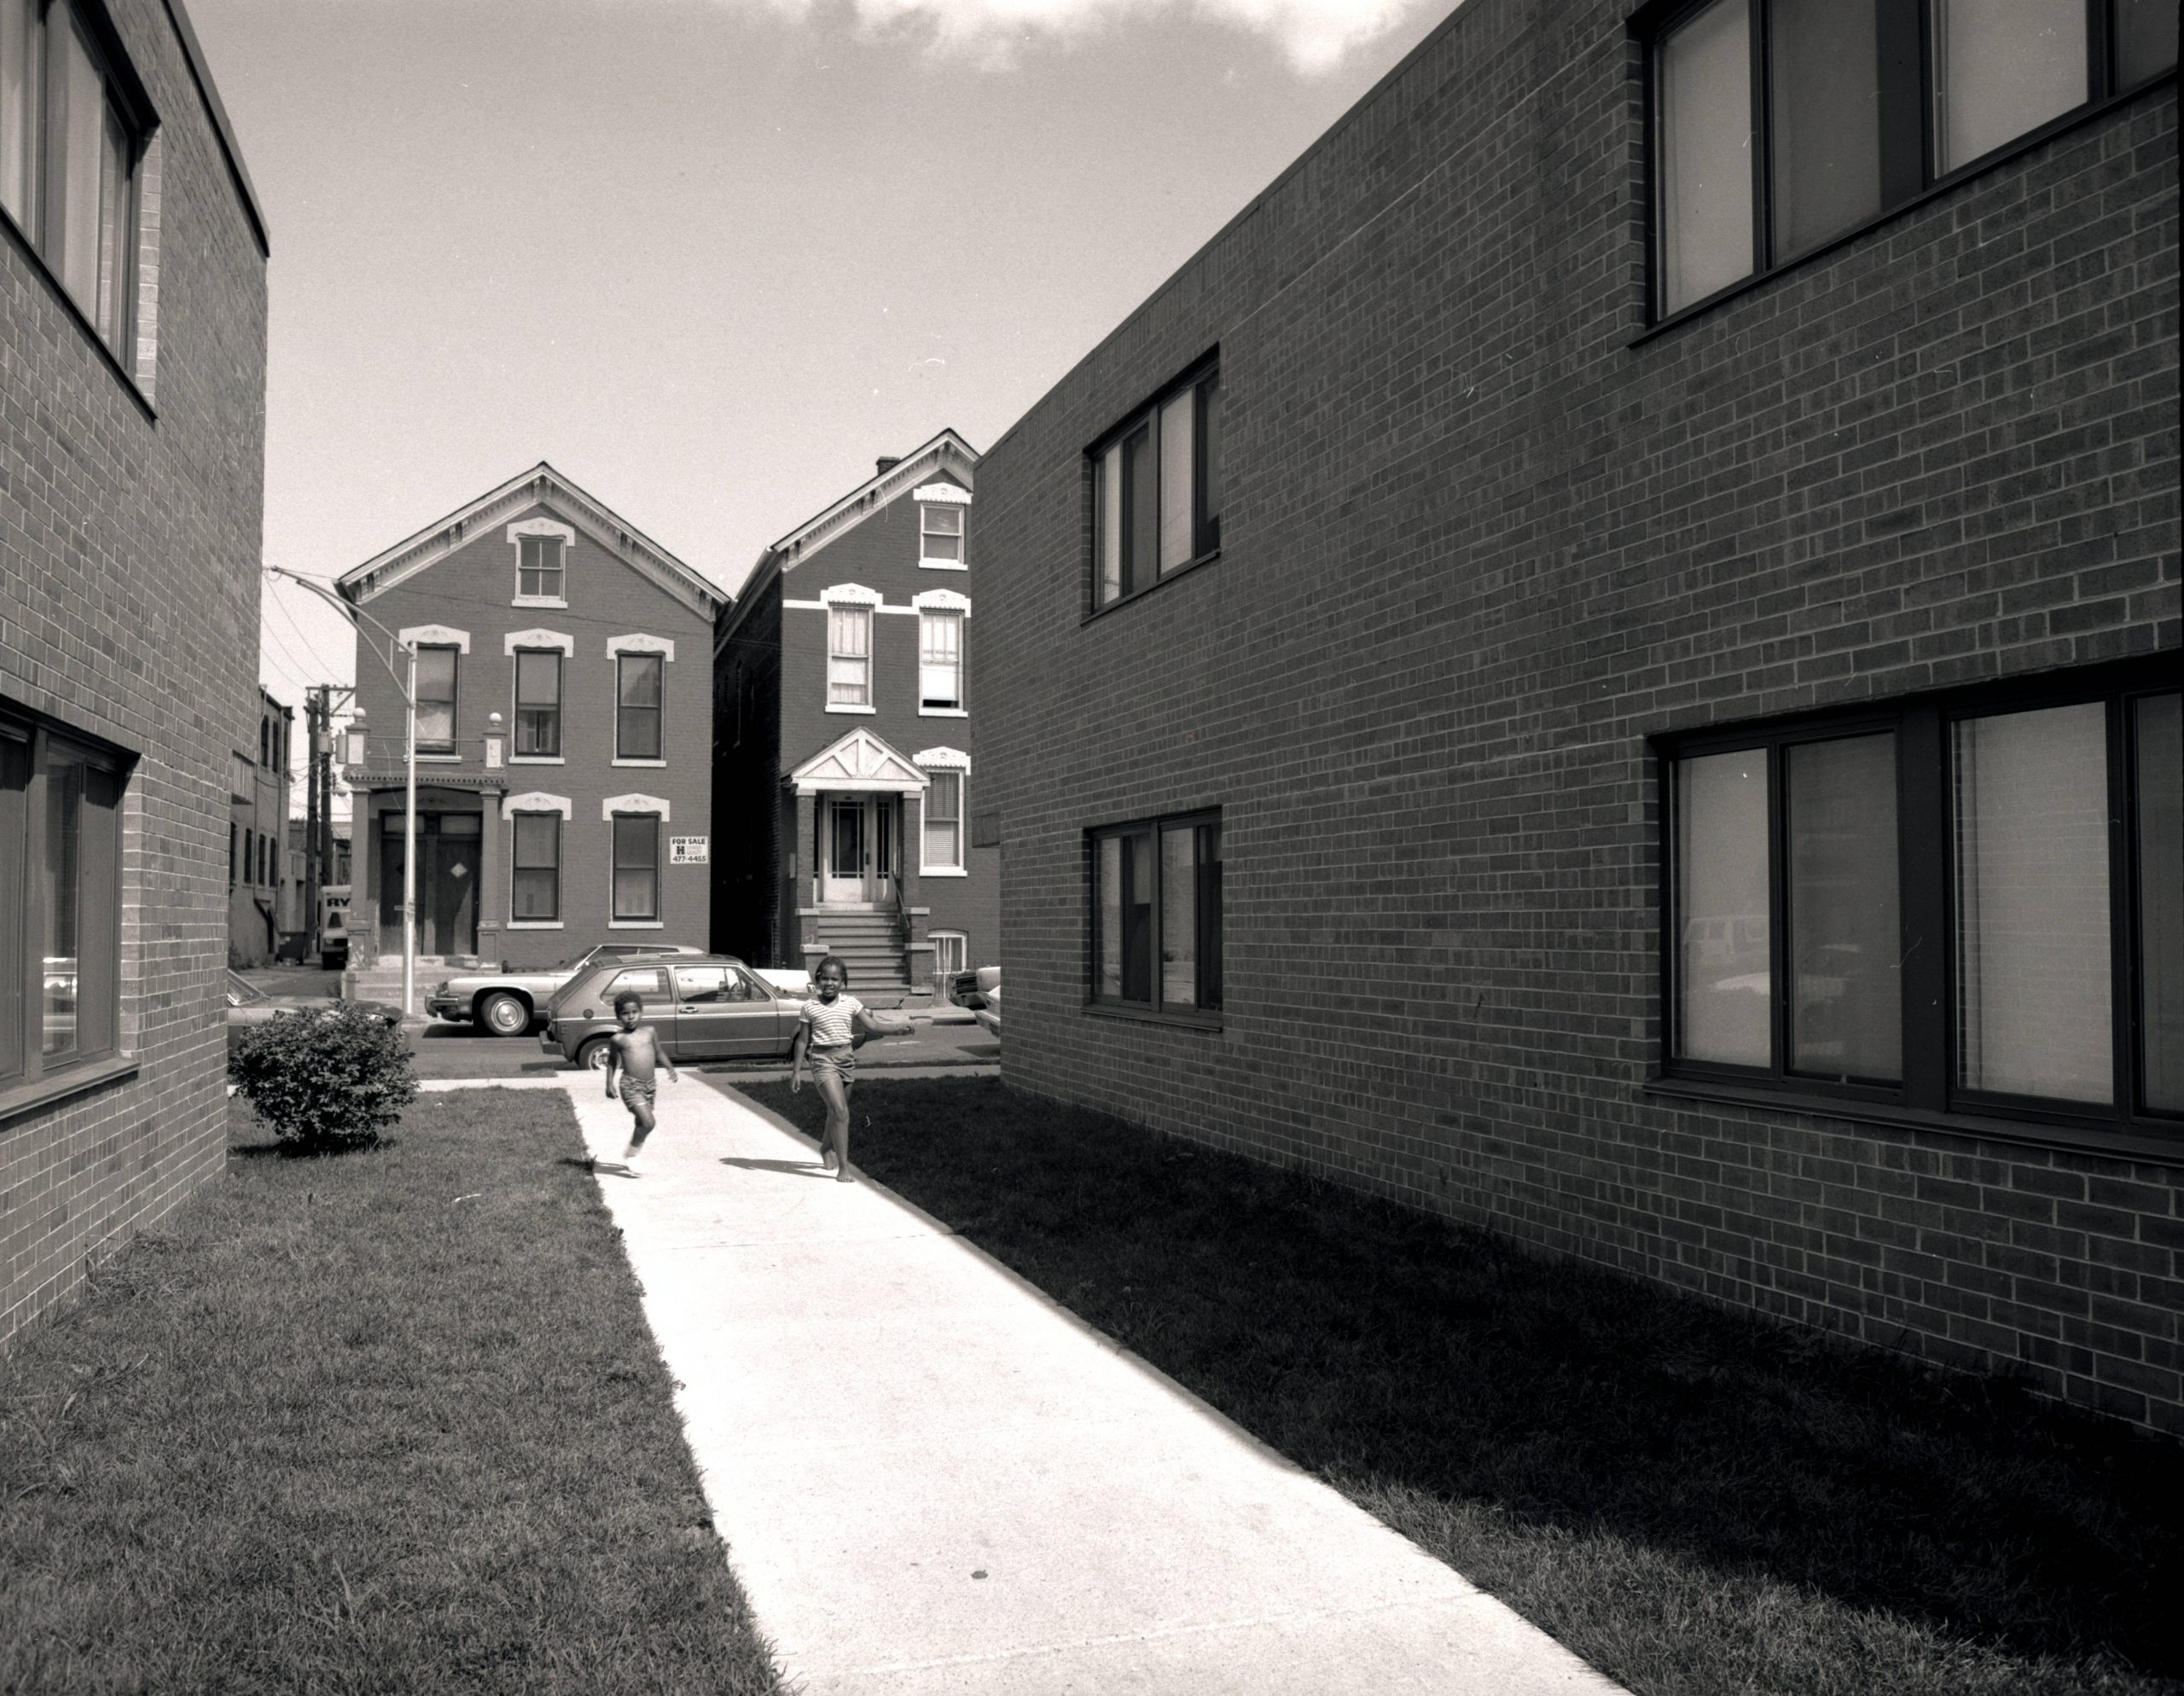 Two children are walking down the sidewalk between two new buildings.